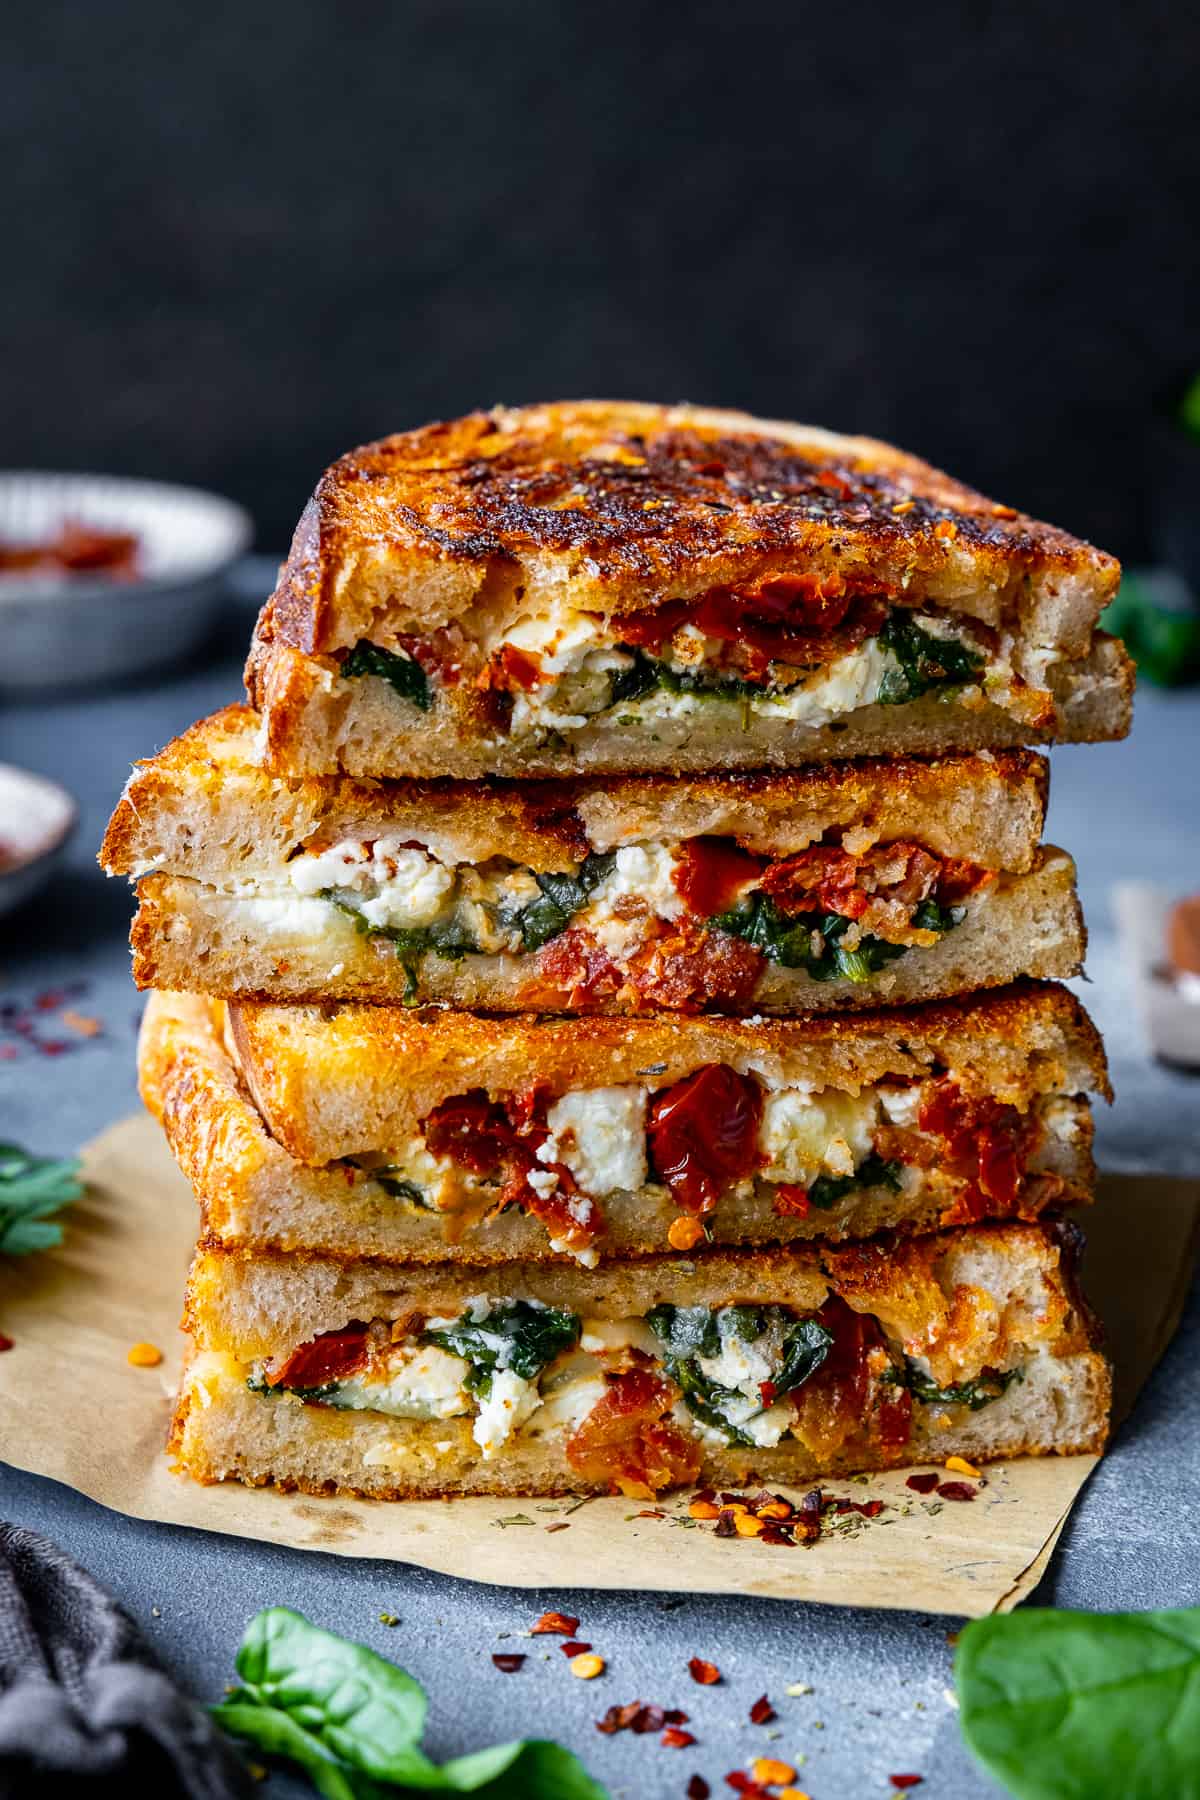 Feta Grilled Cheese Sandwich with Spinach